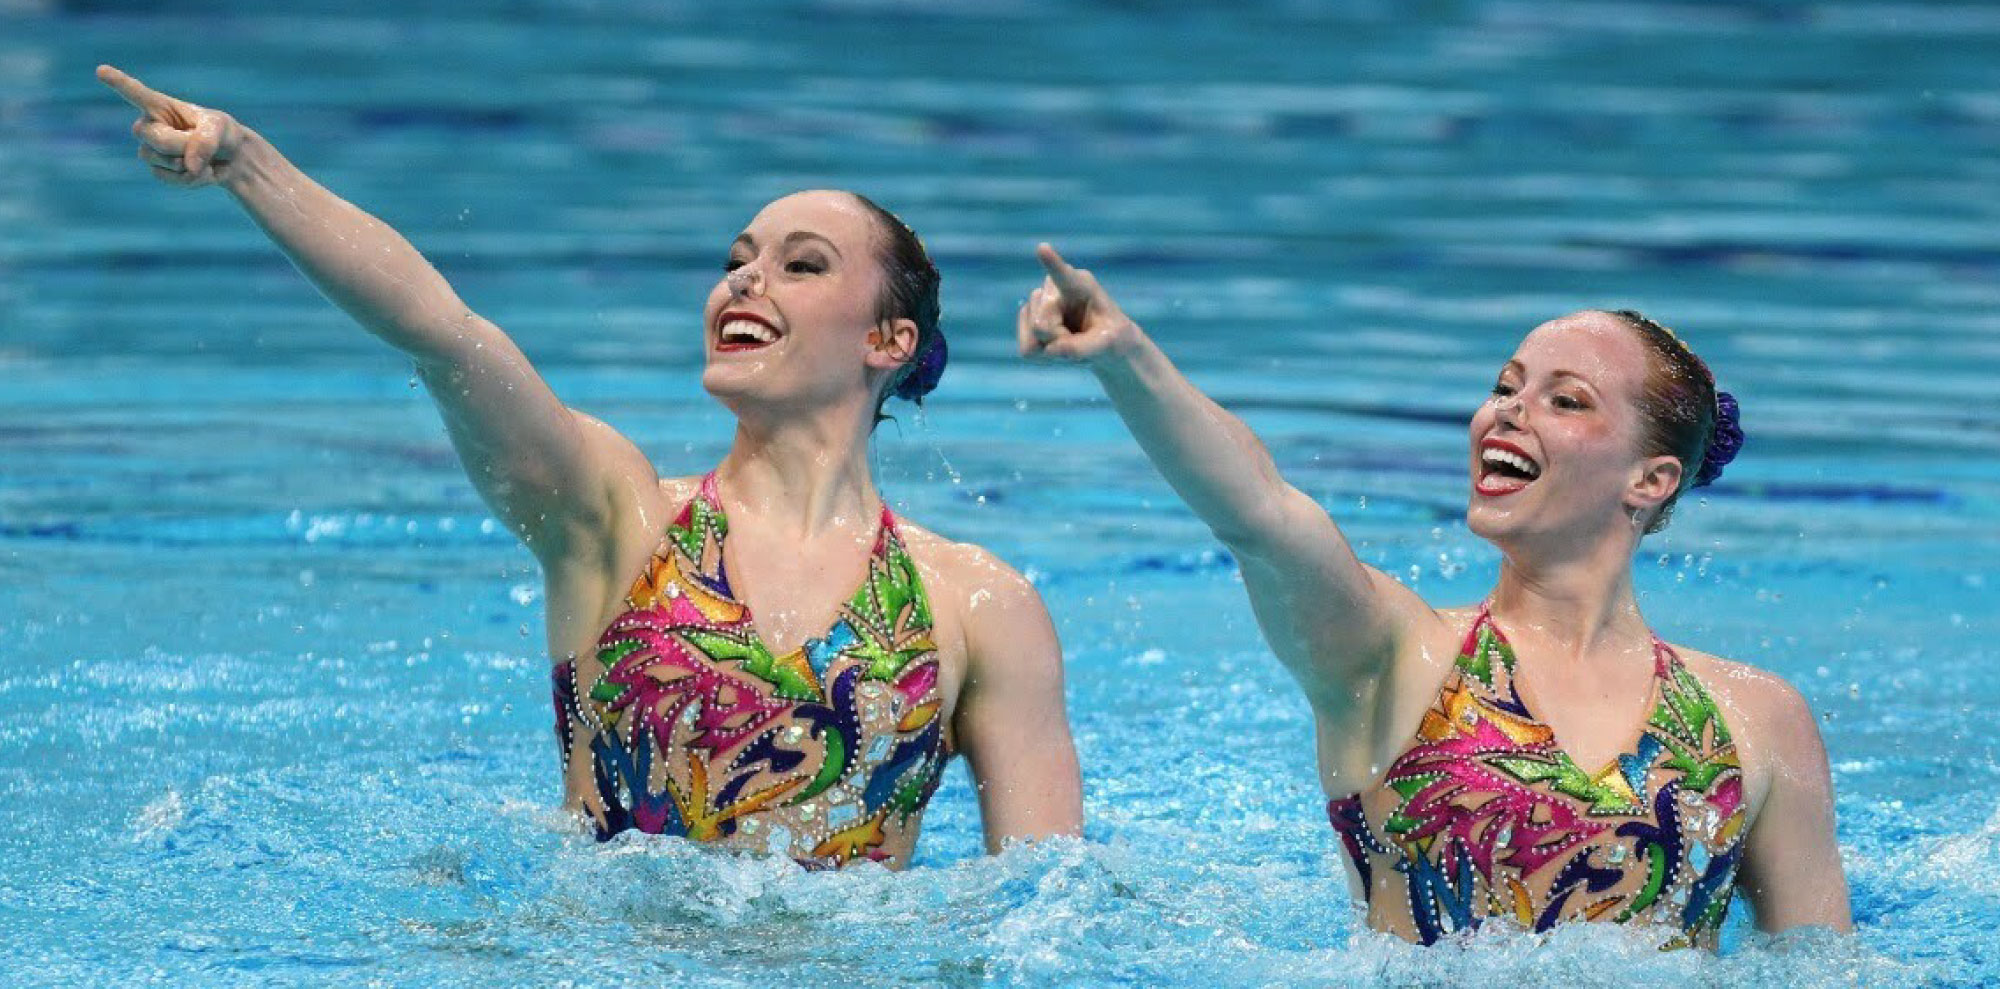 Canadian National Synchronized Swimming Team – Claudia Holzner